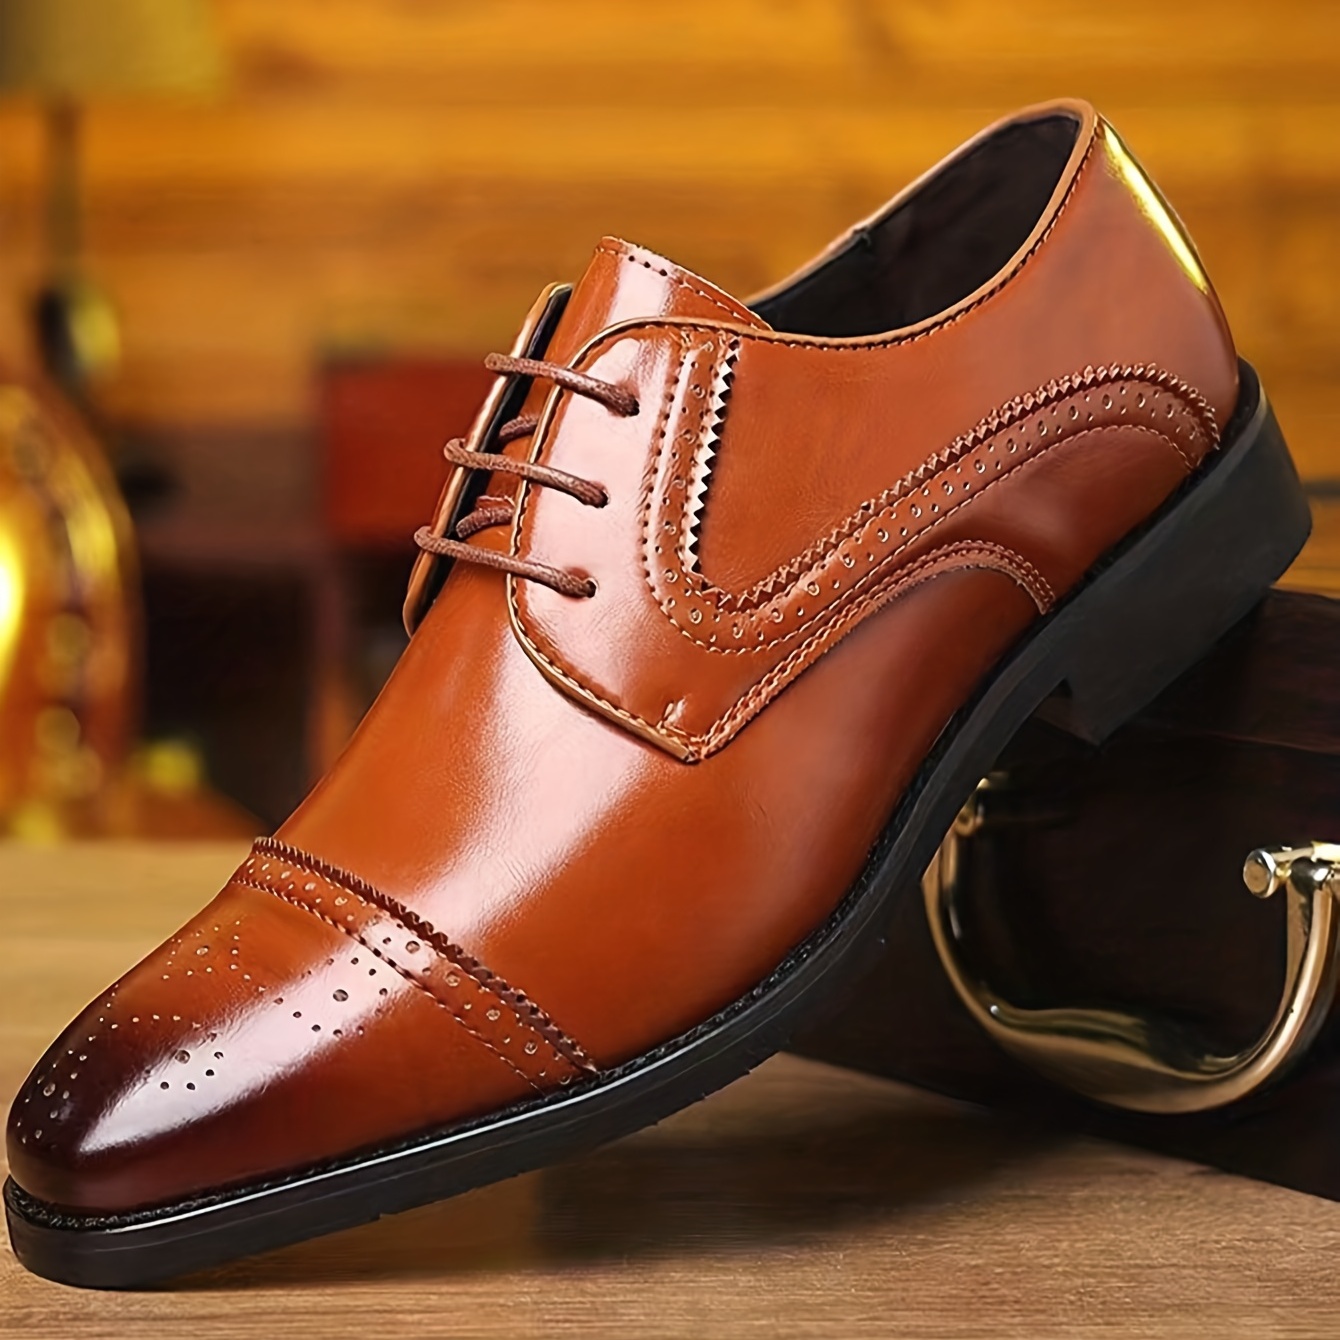 Buy online Black Solid Formal Lace-up Shoe from Formal Shoes for